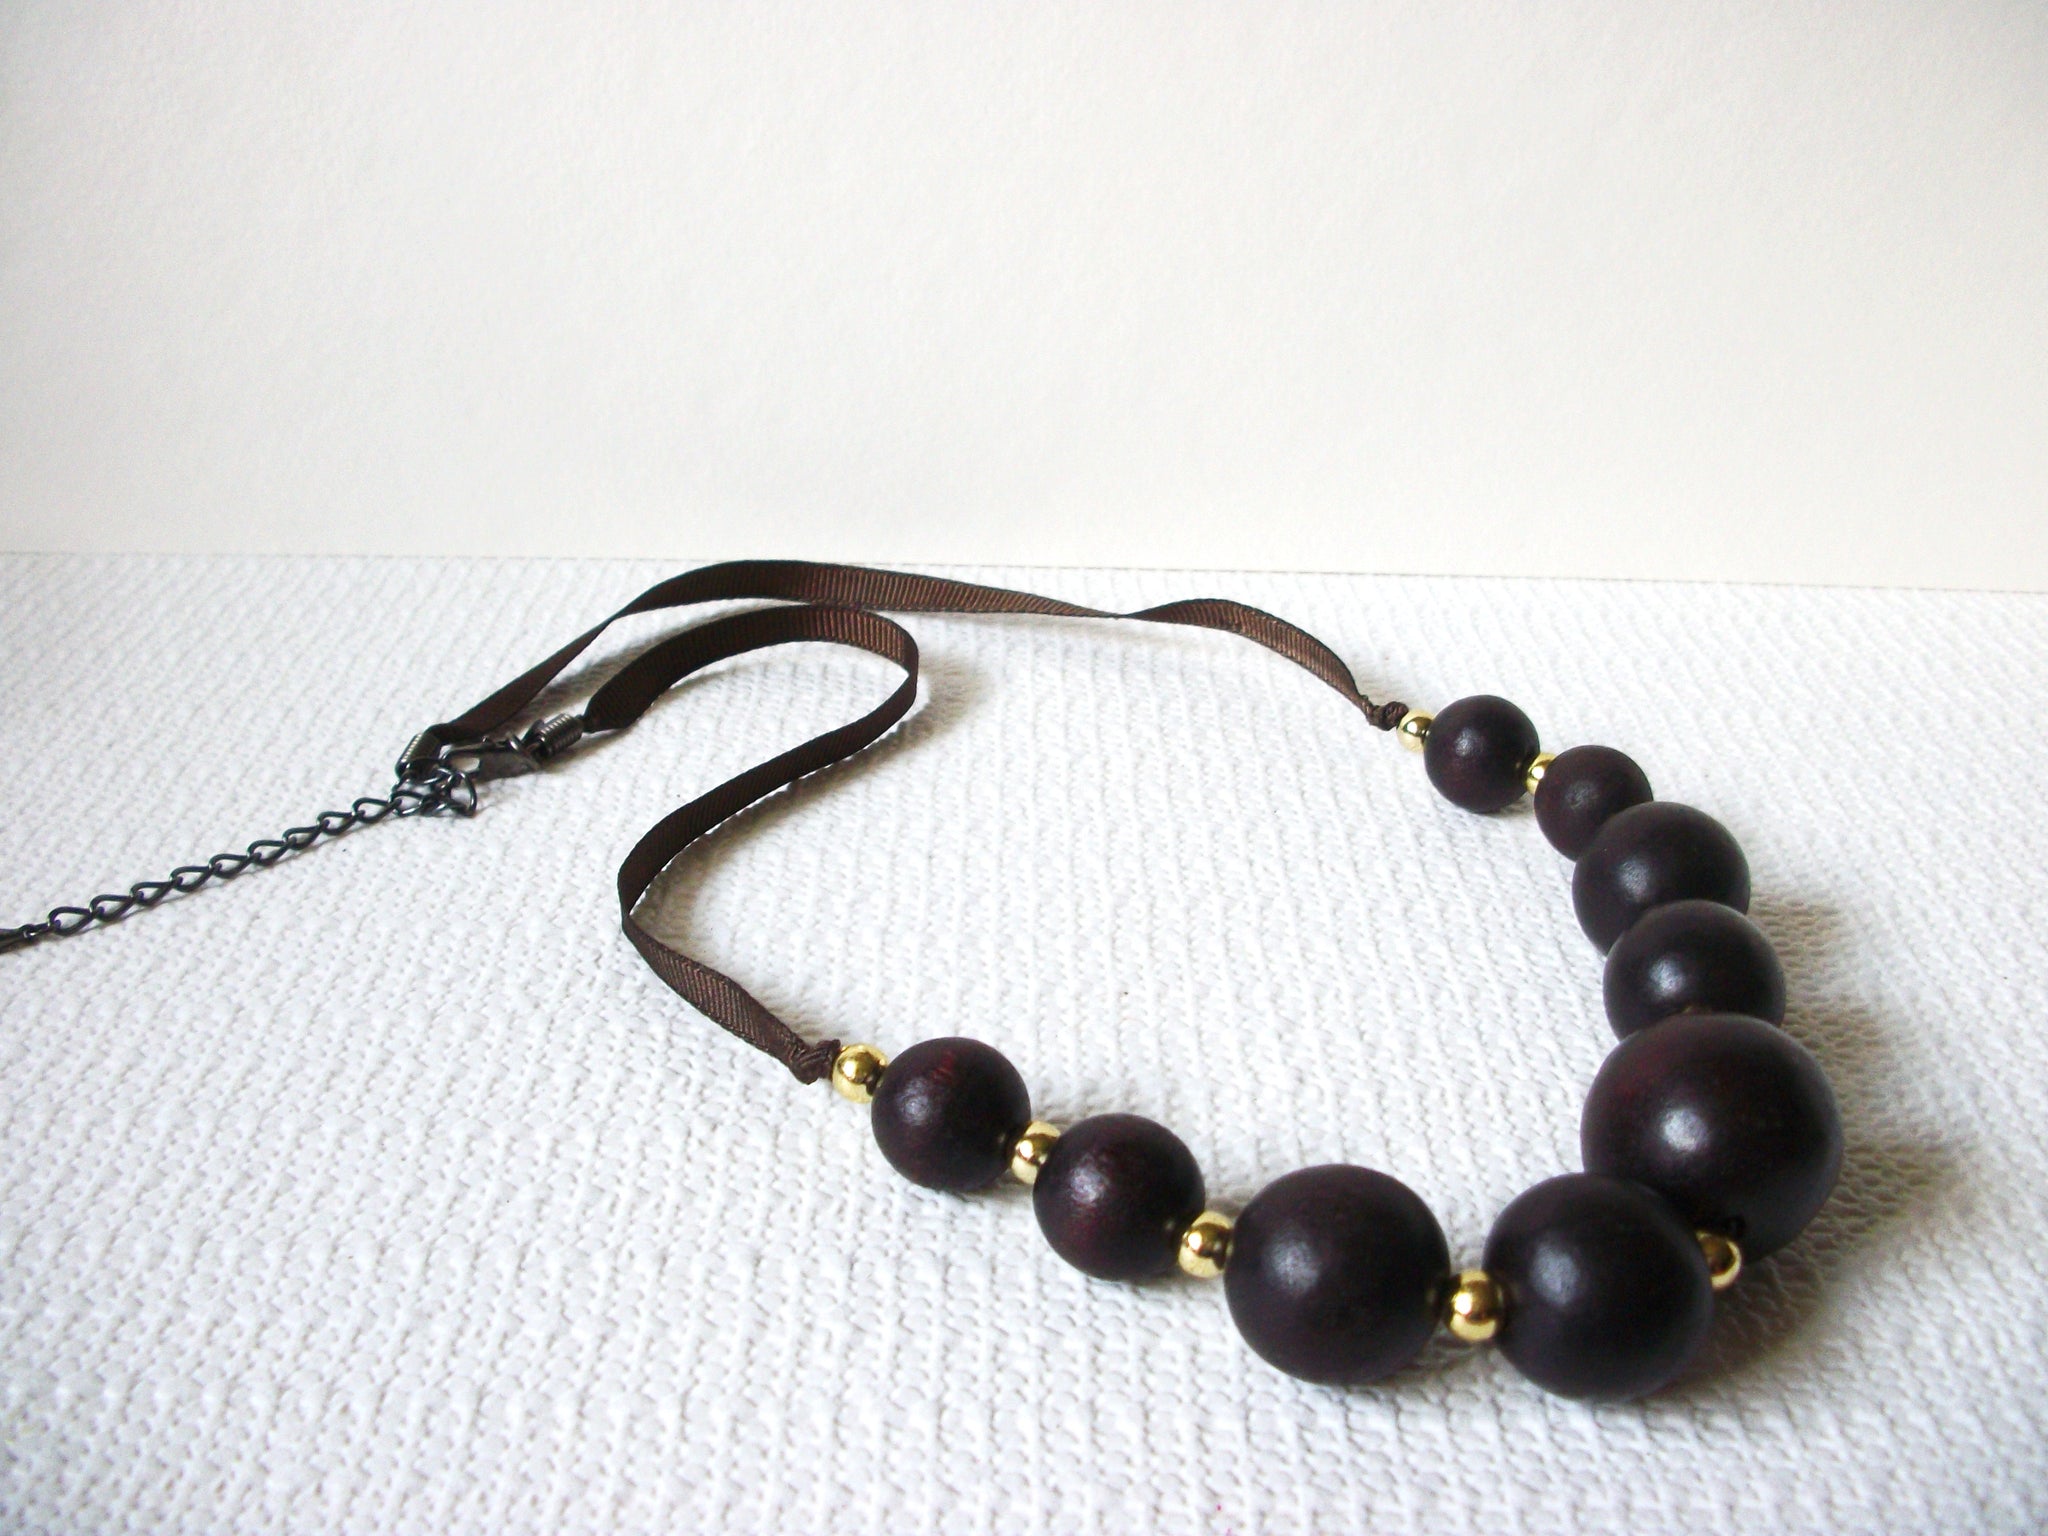 Bohemian M&S Wooden Beads Necklace 80720